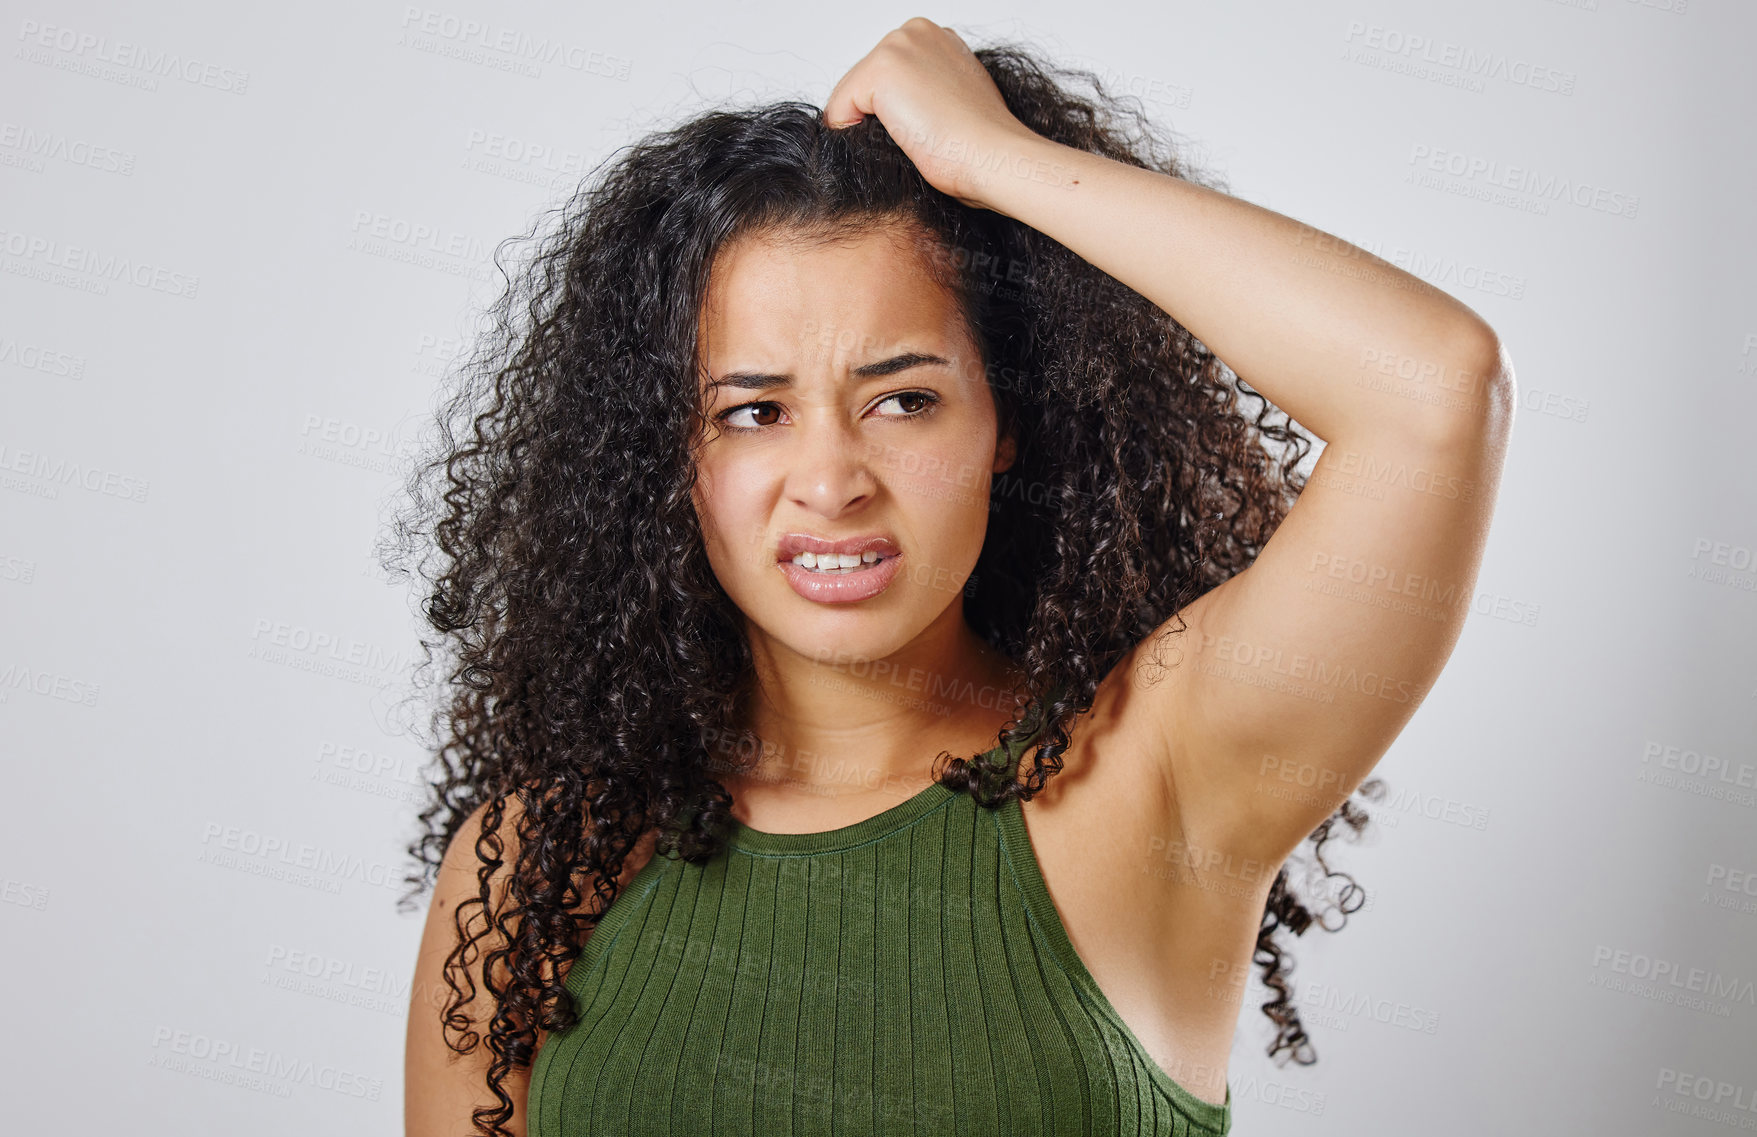 Buy stock photo Shot of a woman with curly hair frowning against a grey background